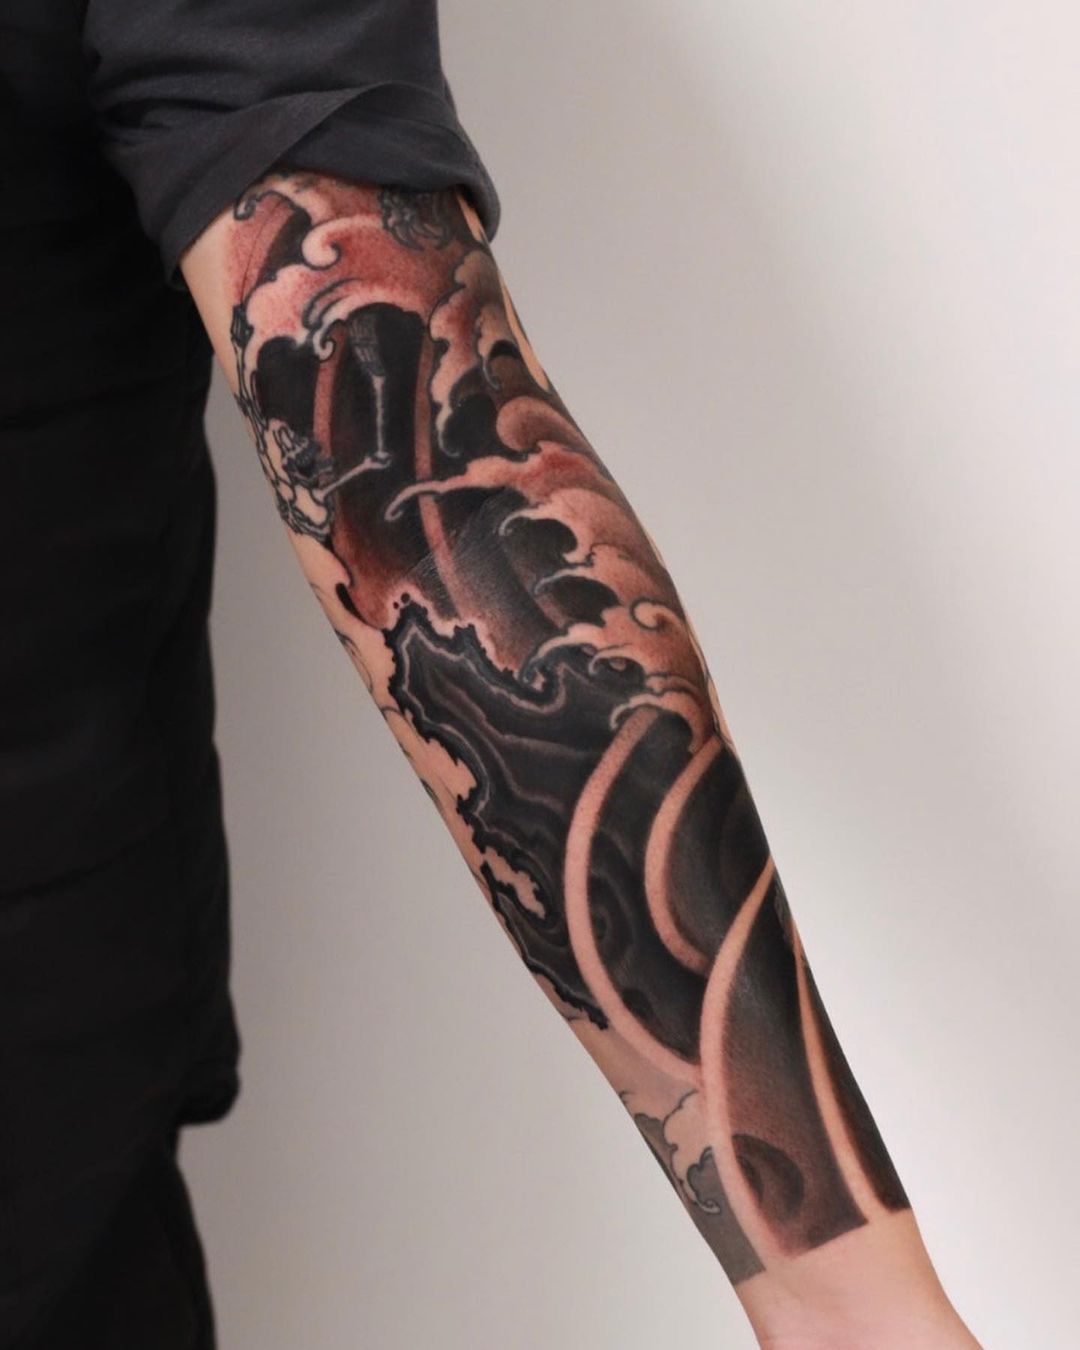 Japanese waves tattoo ideas by